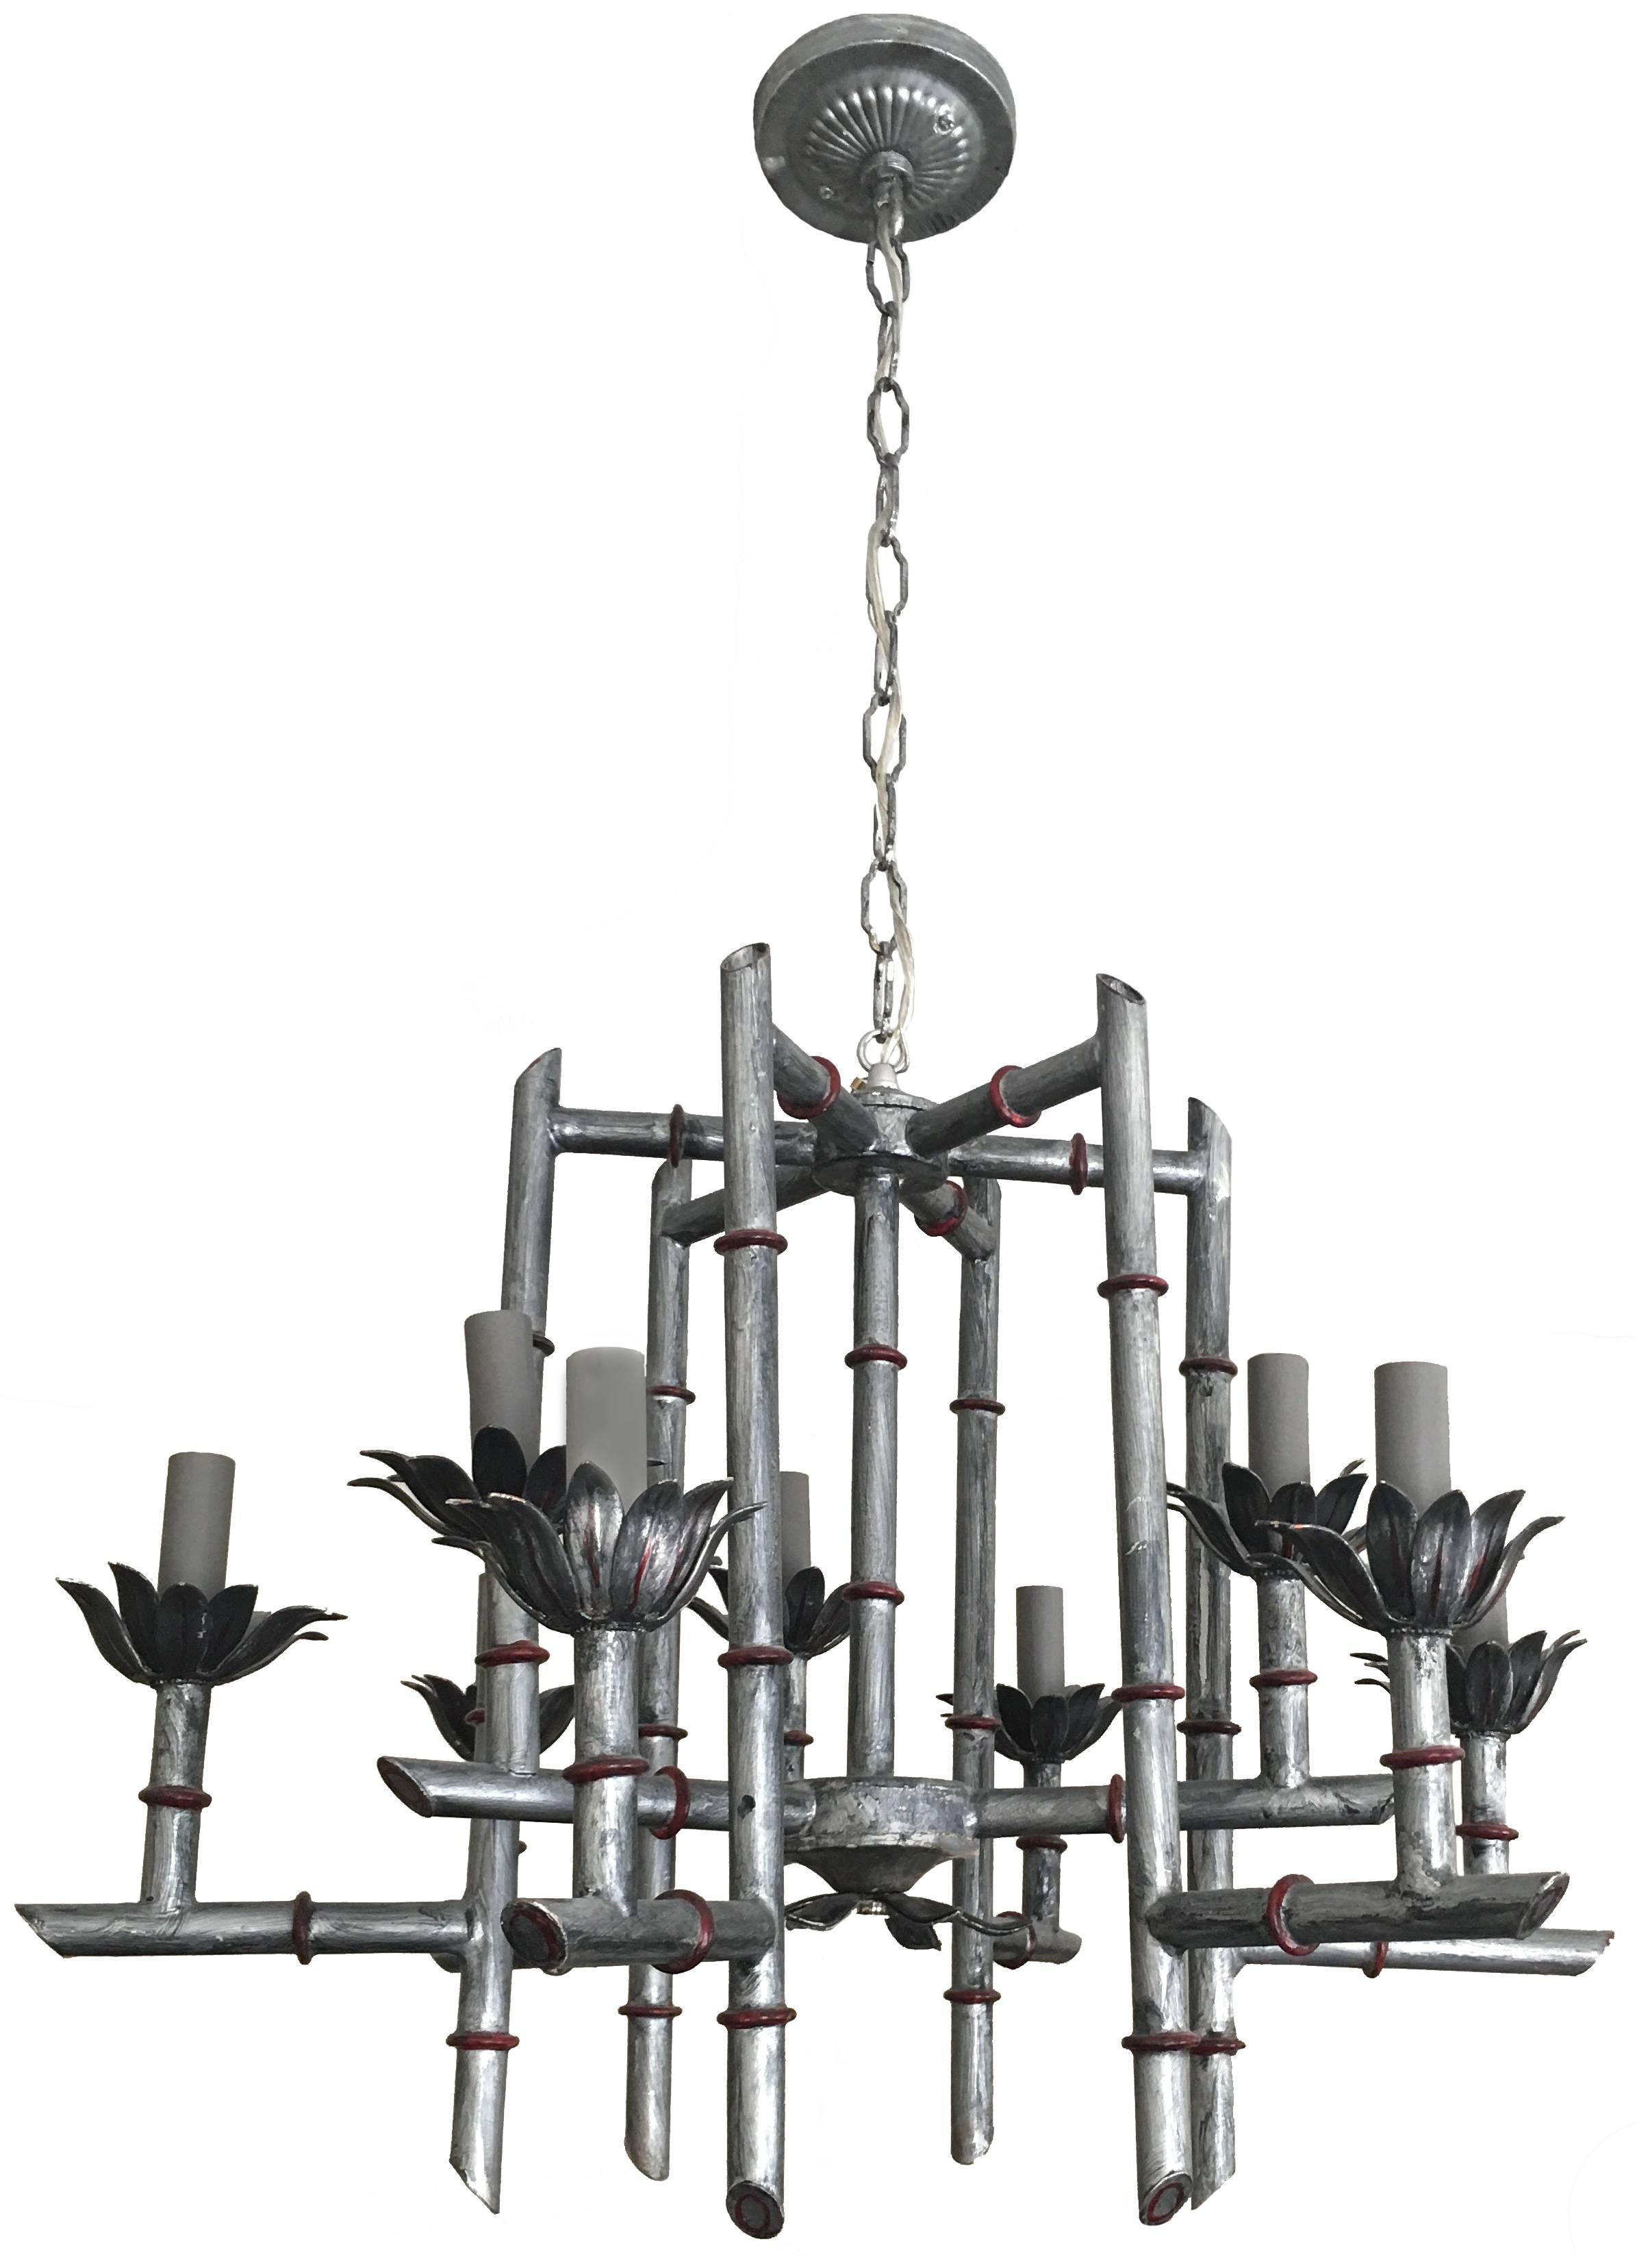 Custom painted bamboo-style chandelier. Burnished dark silver with red accents. Newly rewired. 18